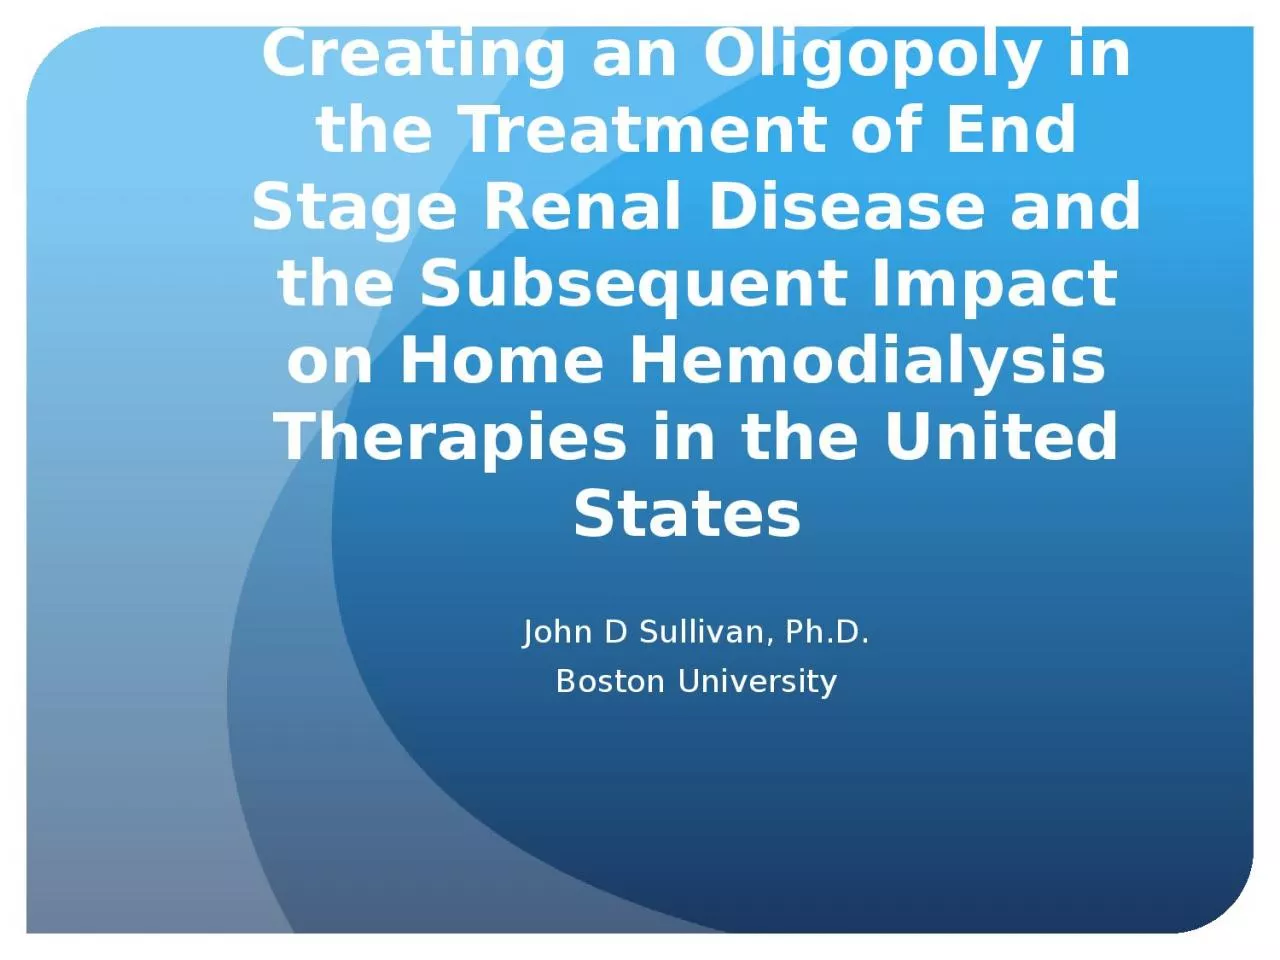 Creating an Oligopoly in the Treatment of End Stage Renal Disease and the Subsequent Impact